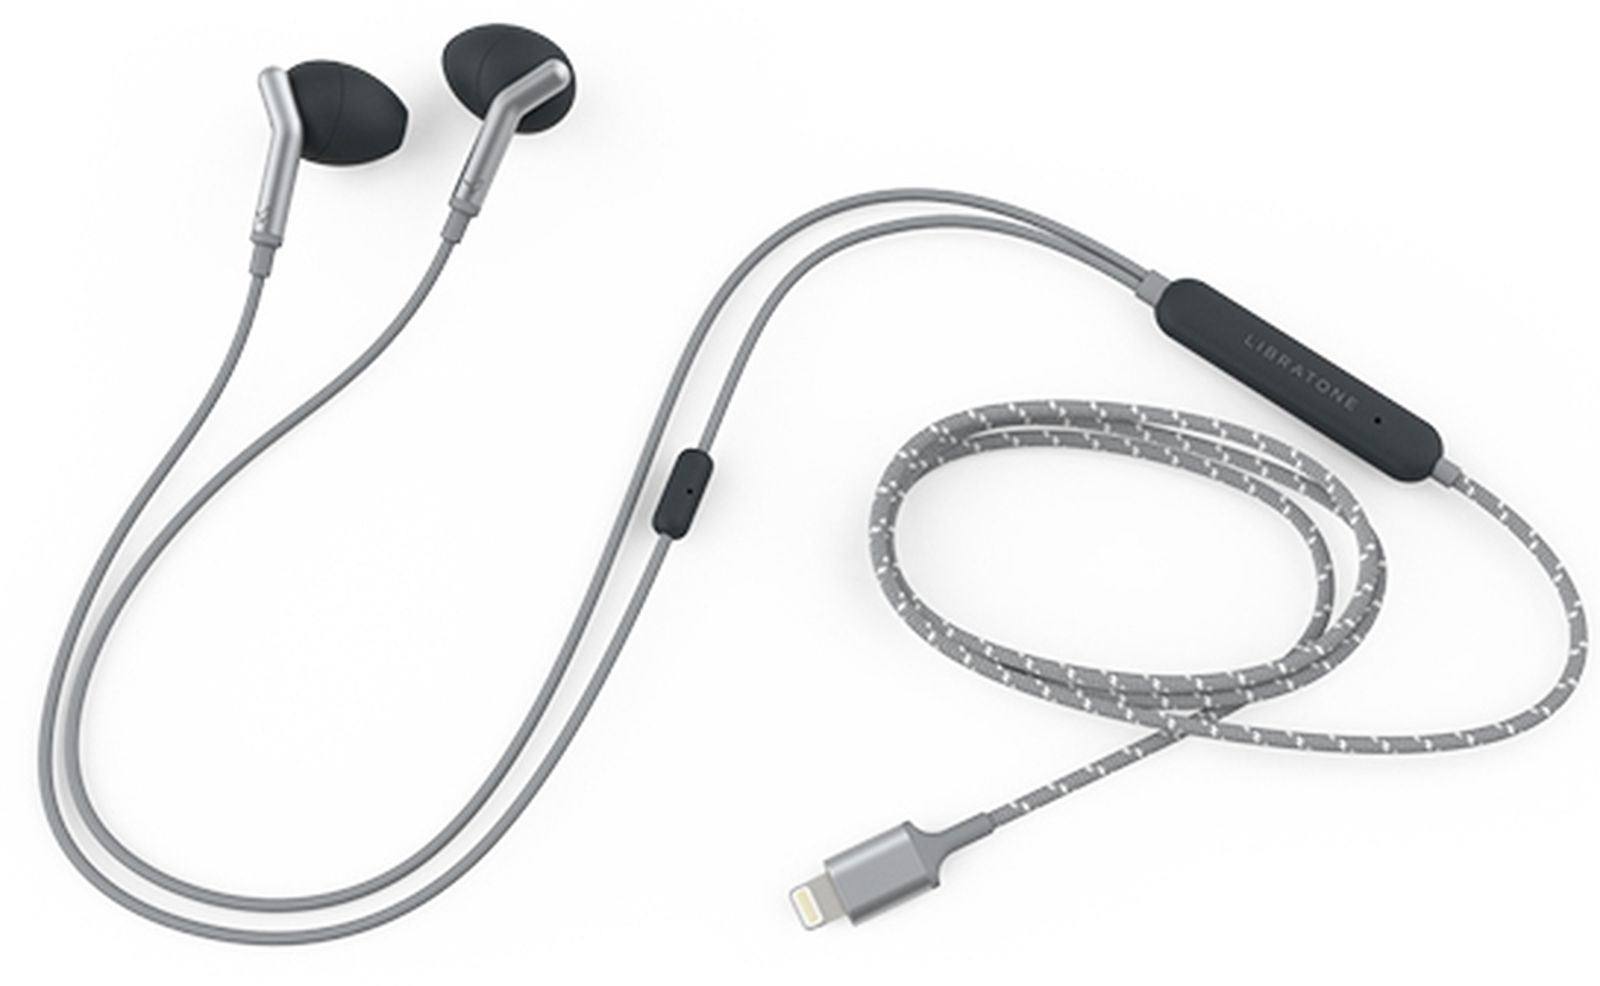 Libratone Debuts Battery-Free Noise Cancelling Headphones With Lightning  Connector Ahead of iPhone 7 - MacRumors